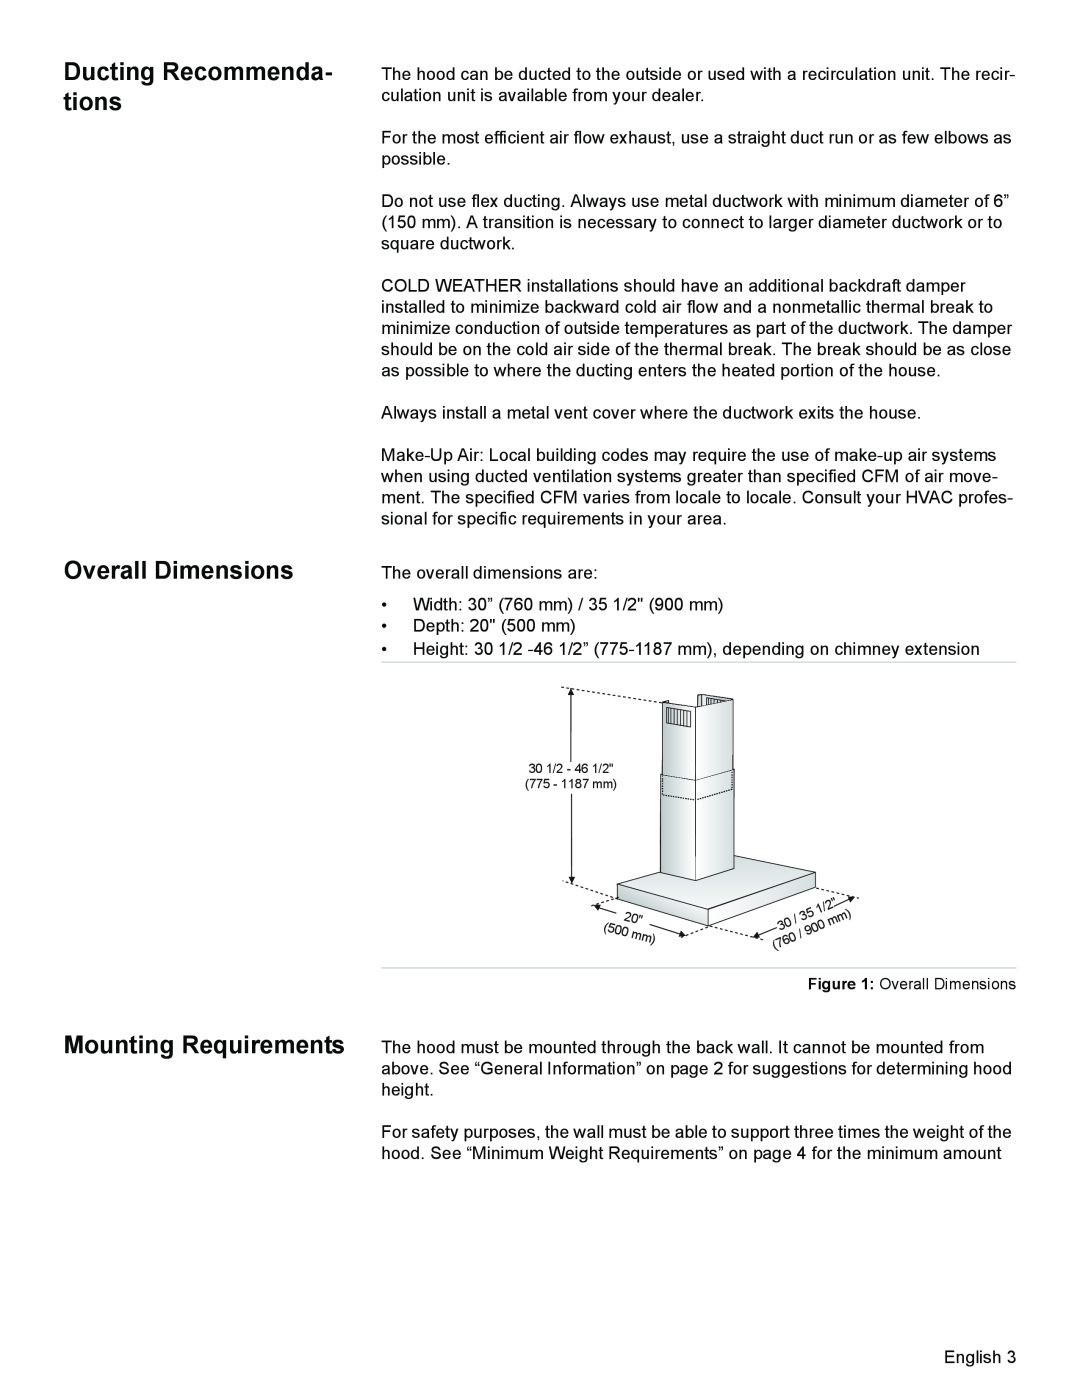 Bosch Appliances DKE94 installation manual Ducting Recommenda- tions Overall Dimensions 